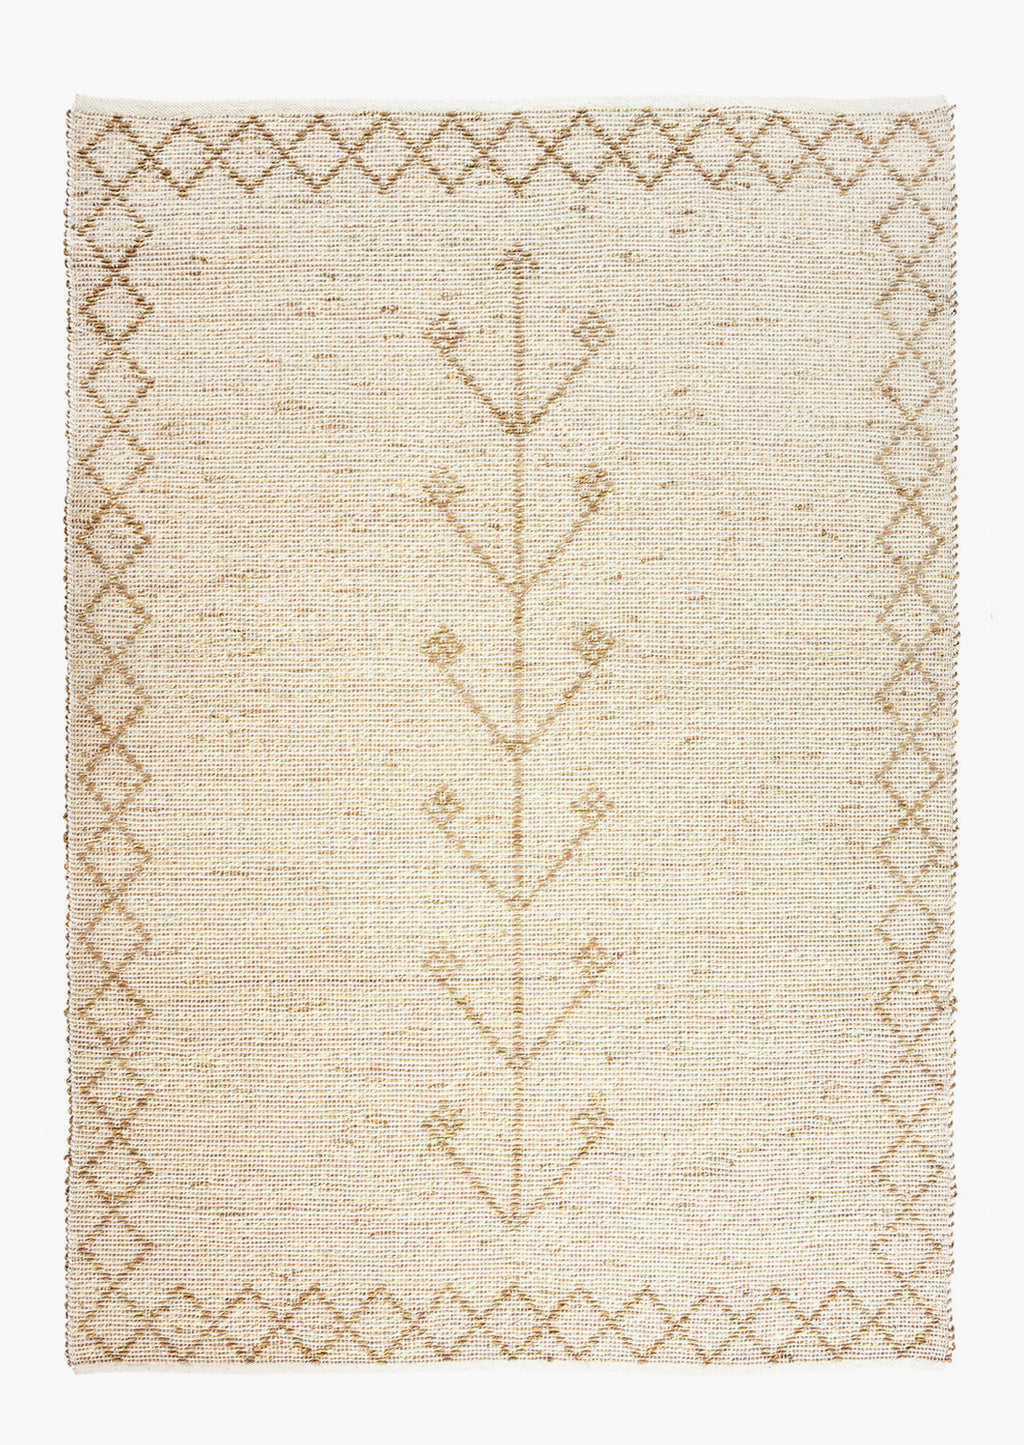 5' x 7' [$348.00]: A seagrass rug in neutral color with talisman pattern and diamond border.